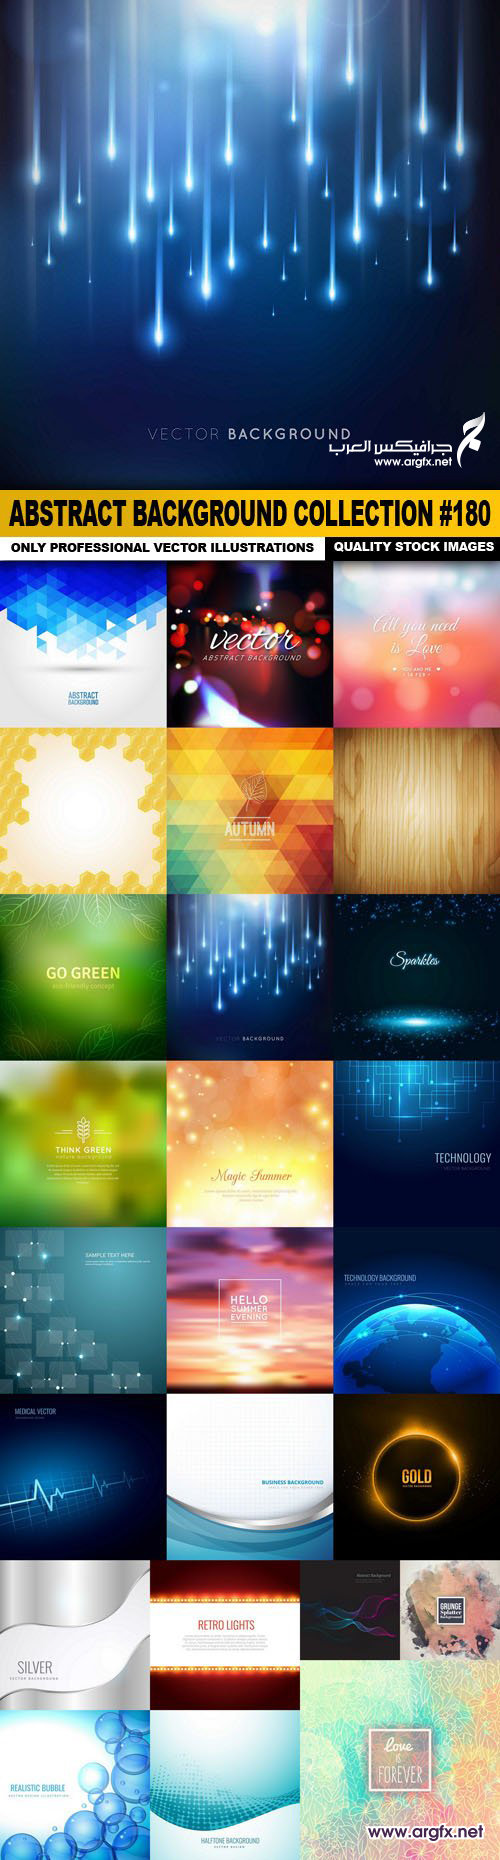 Abstract Background Collection #180